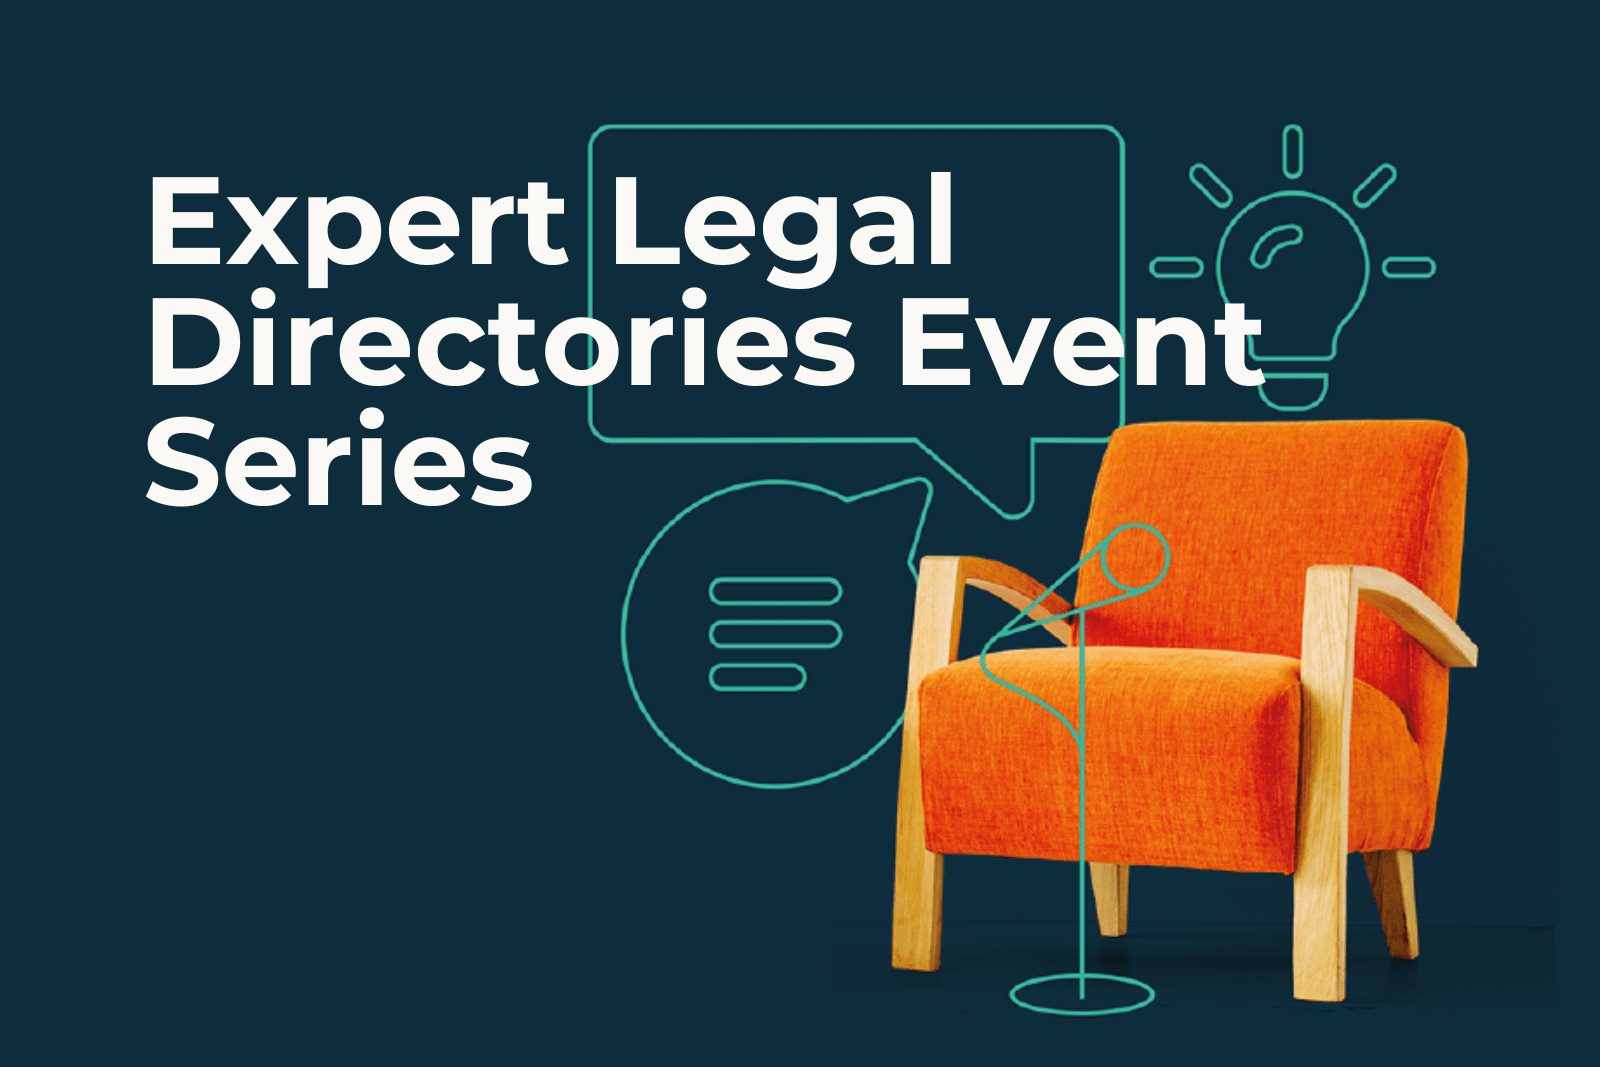 Legal directories event series poster